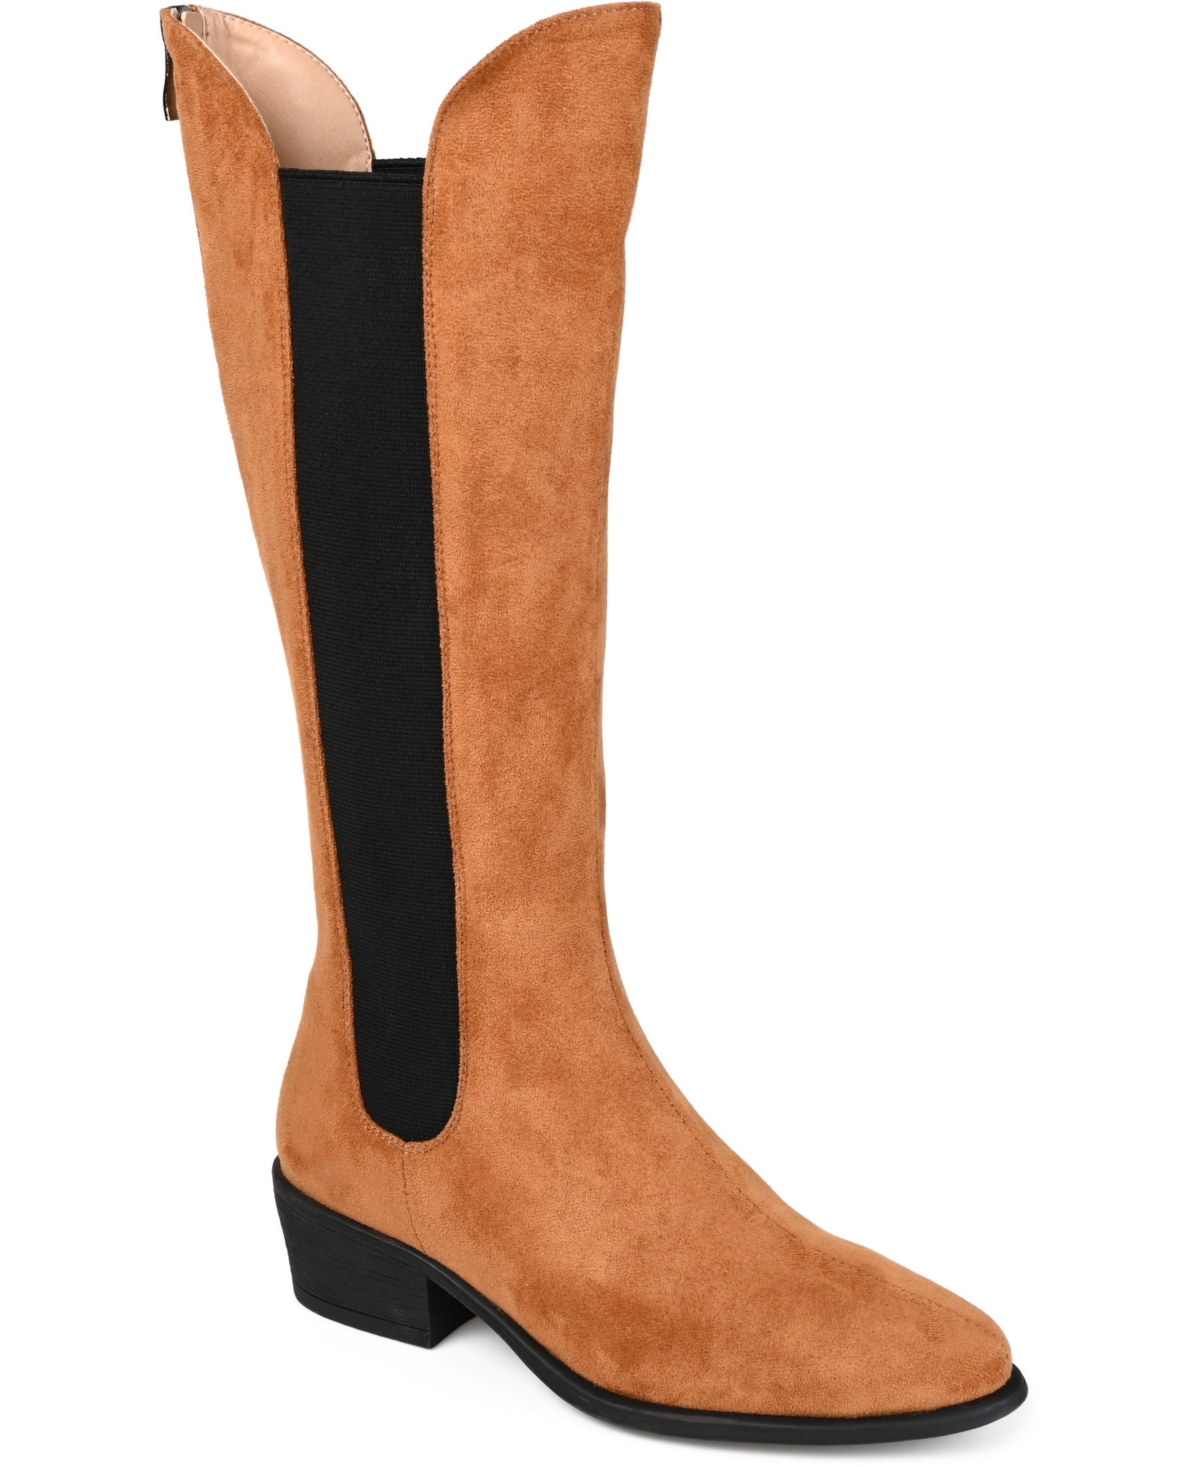 Women's Celesst Wide Calf Boots - Taupe